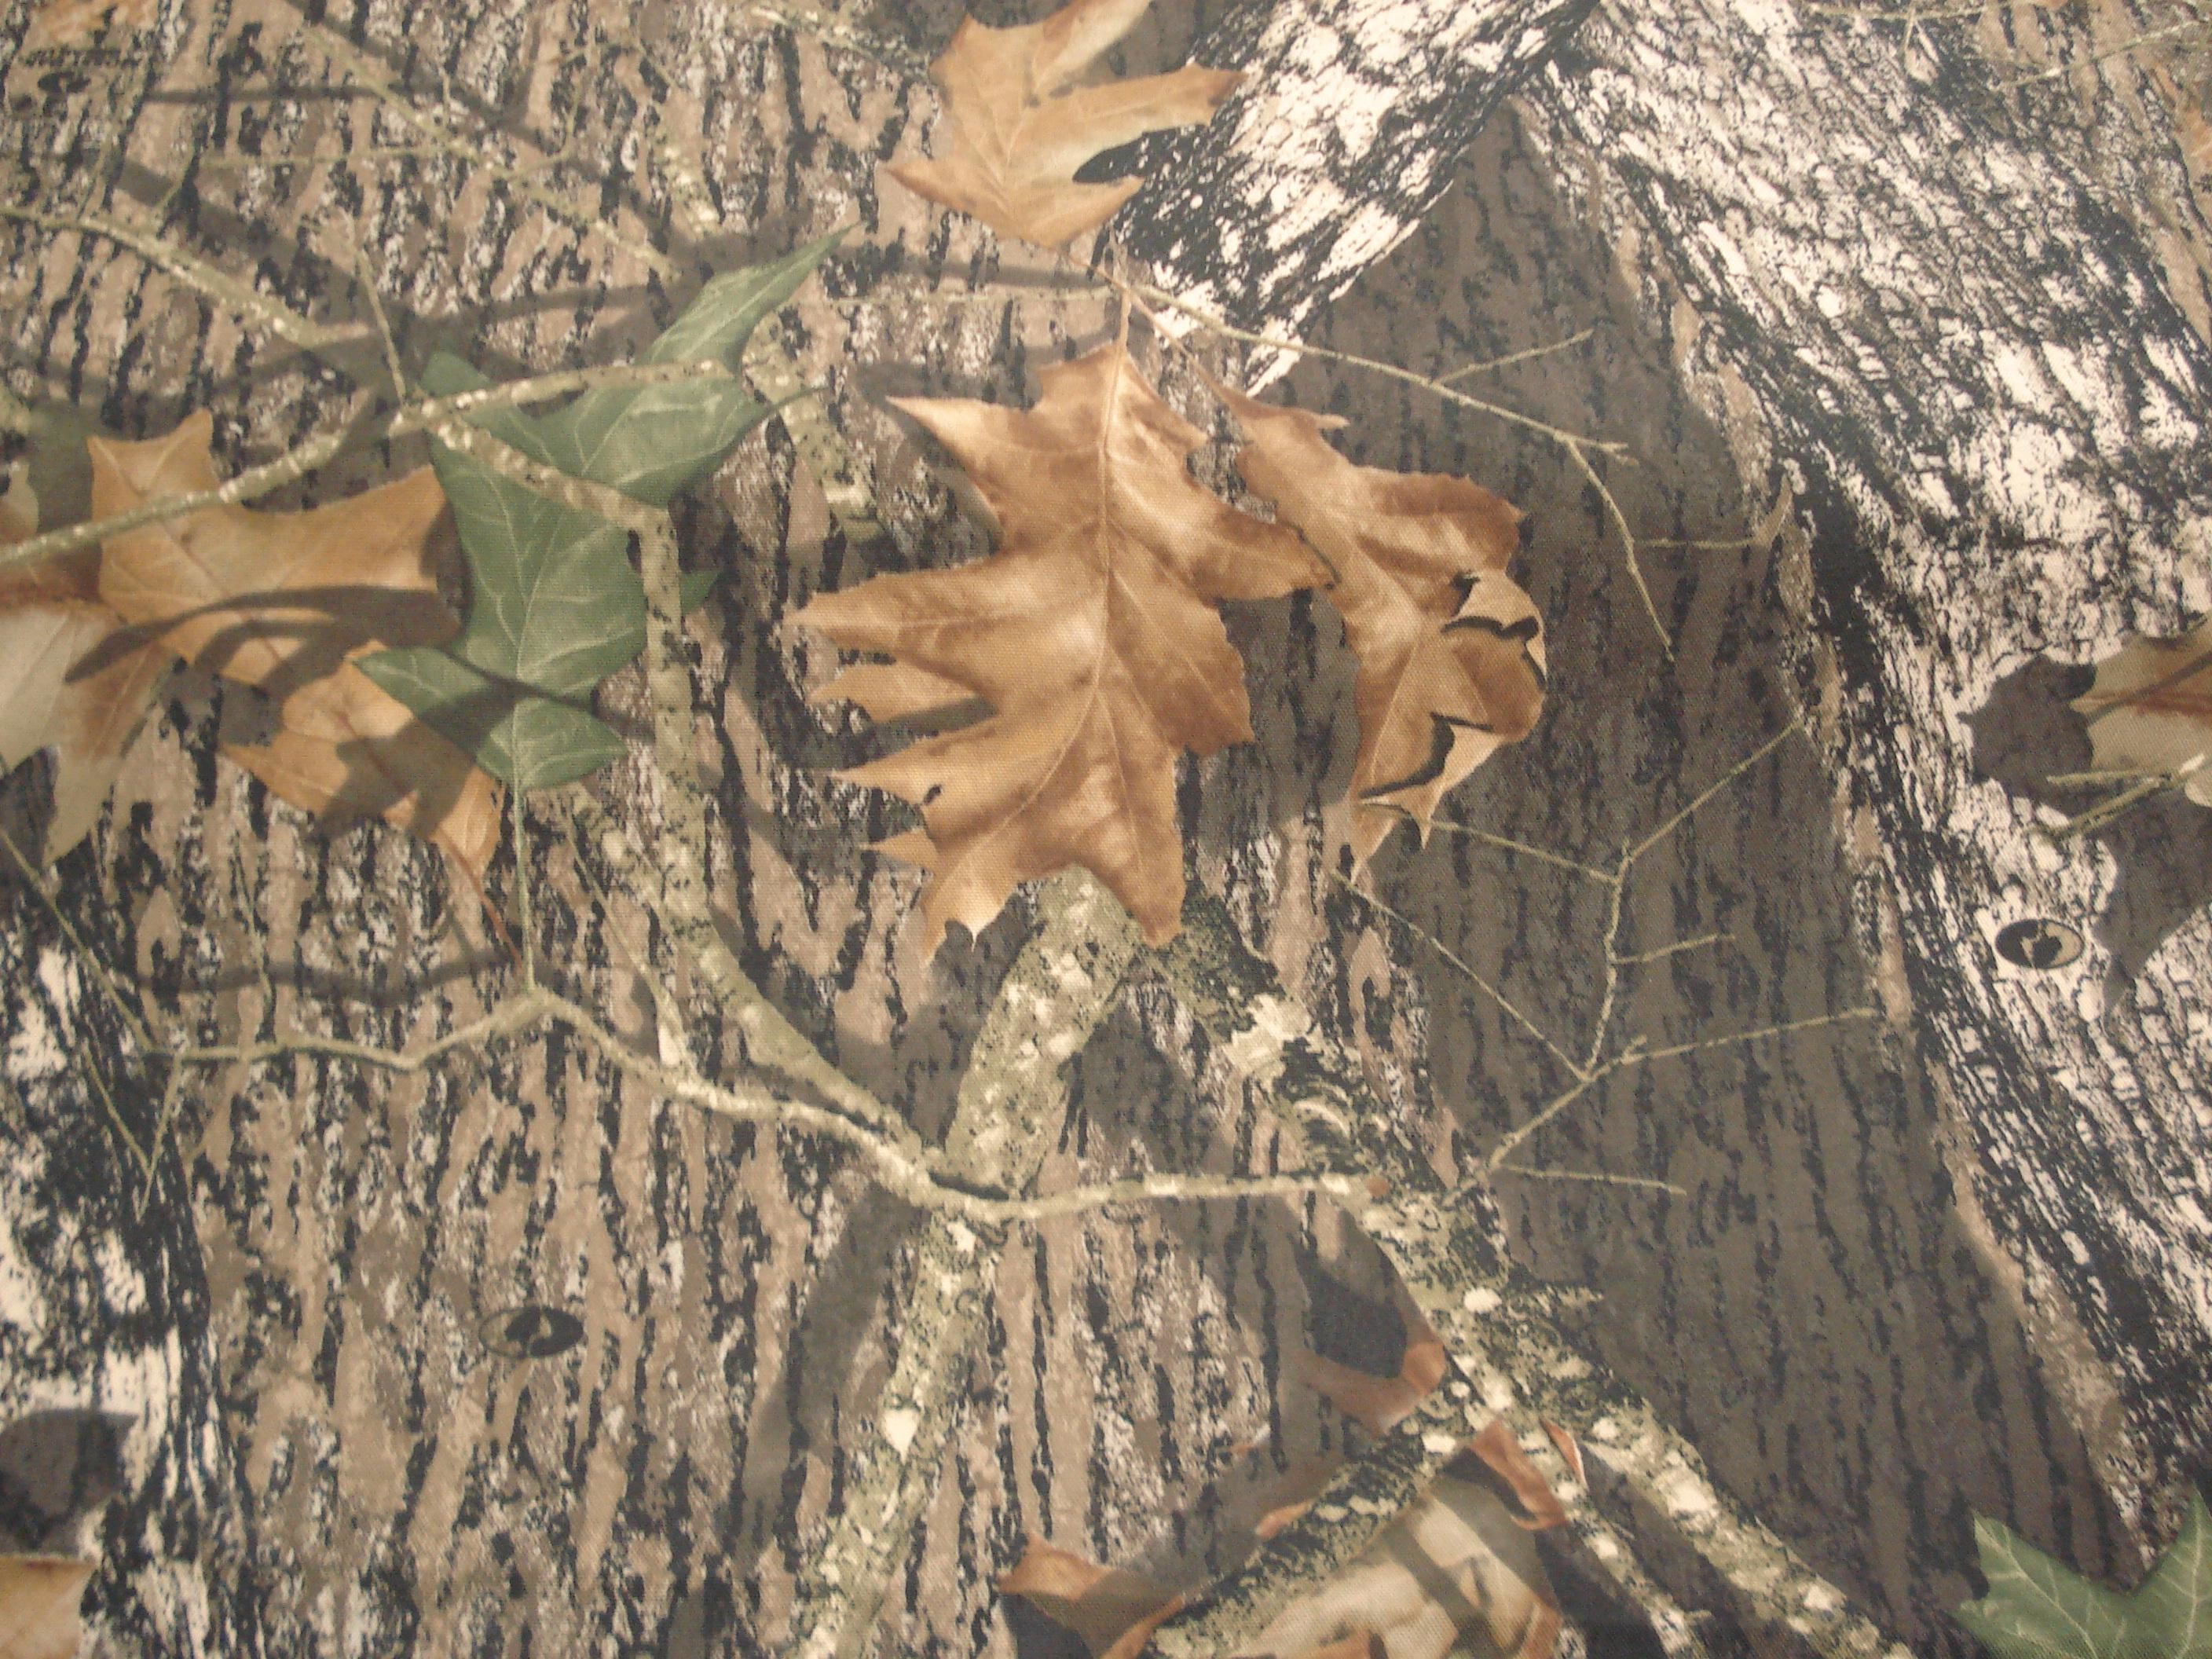 2816x2112 ... realtree camouflage hd picture hd wallpapers high definition cool ...